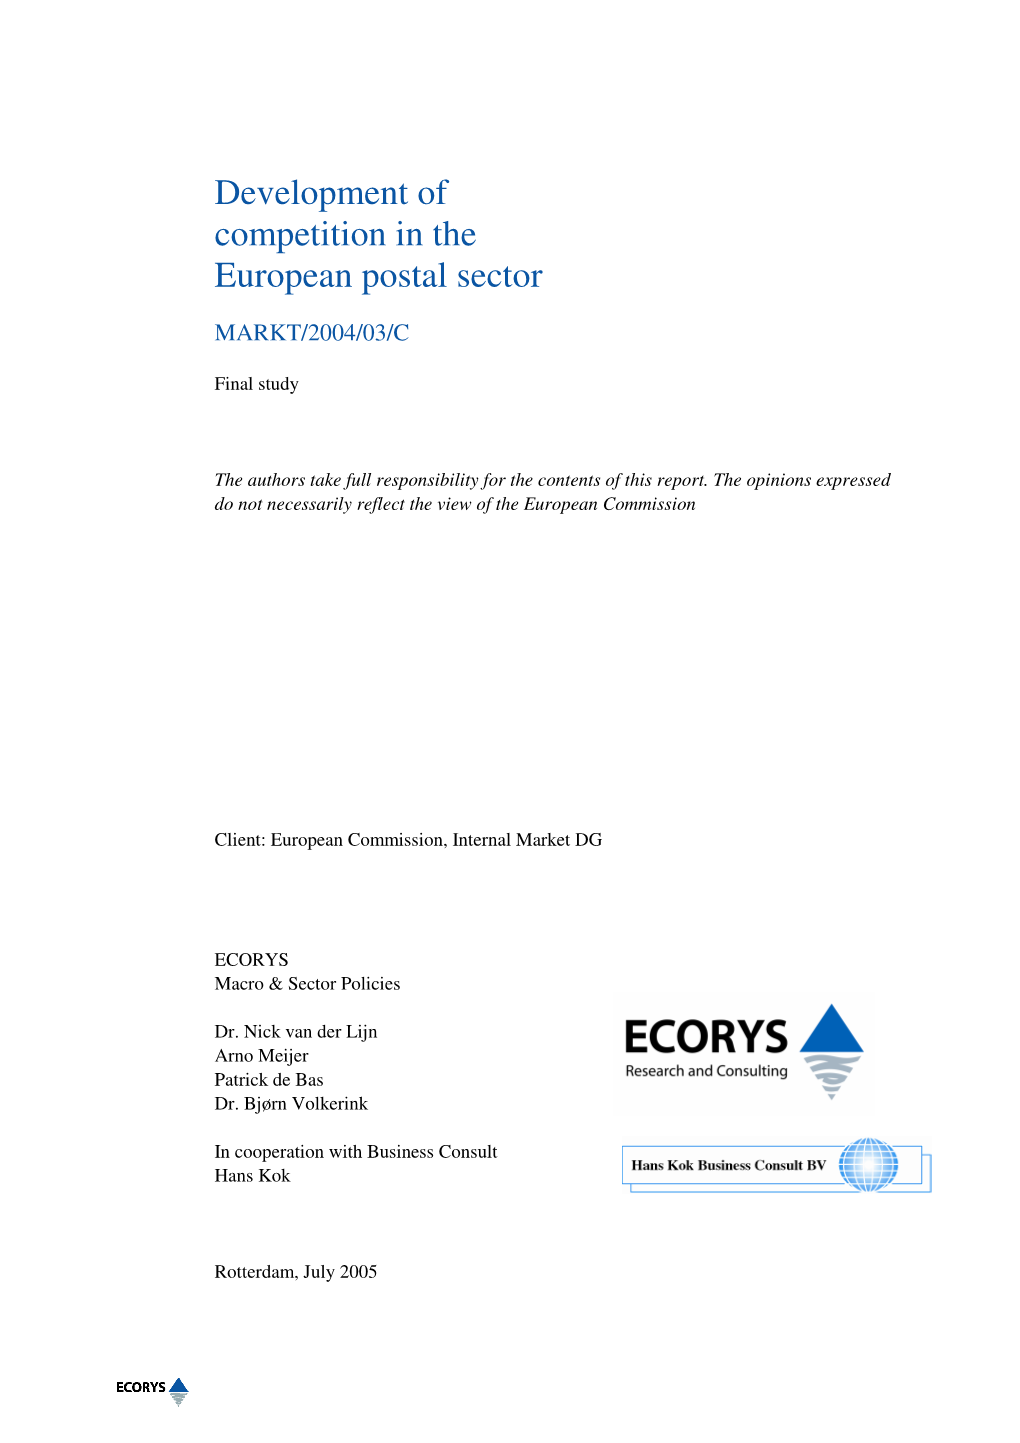 Development of Competition in the European Postal Sector